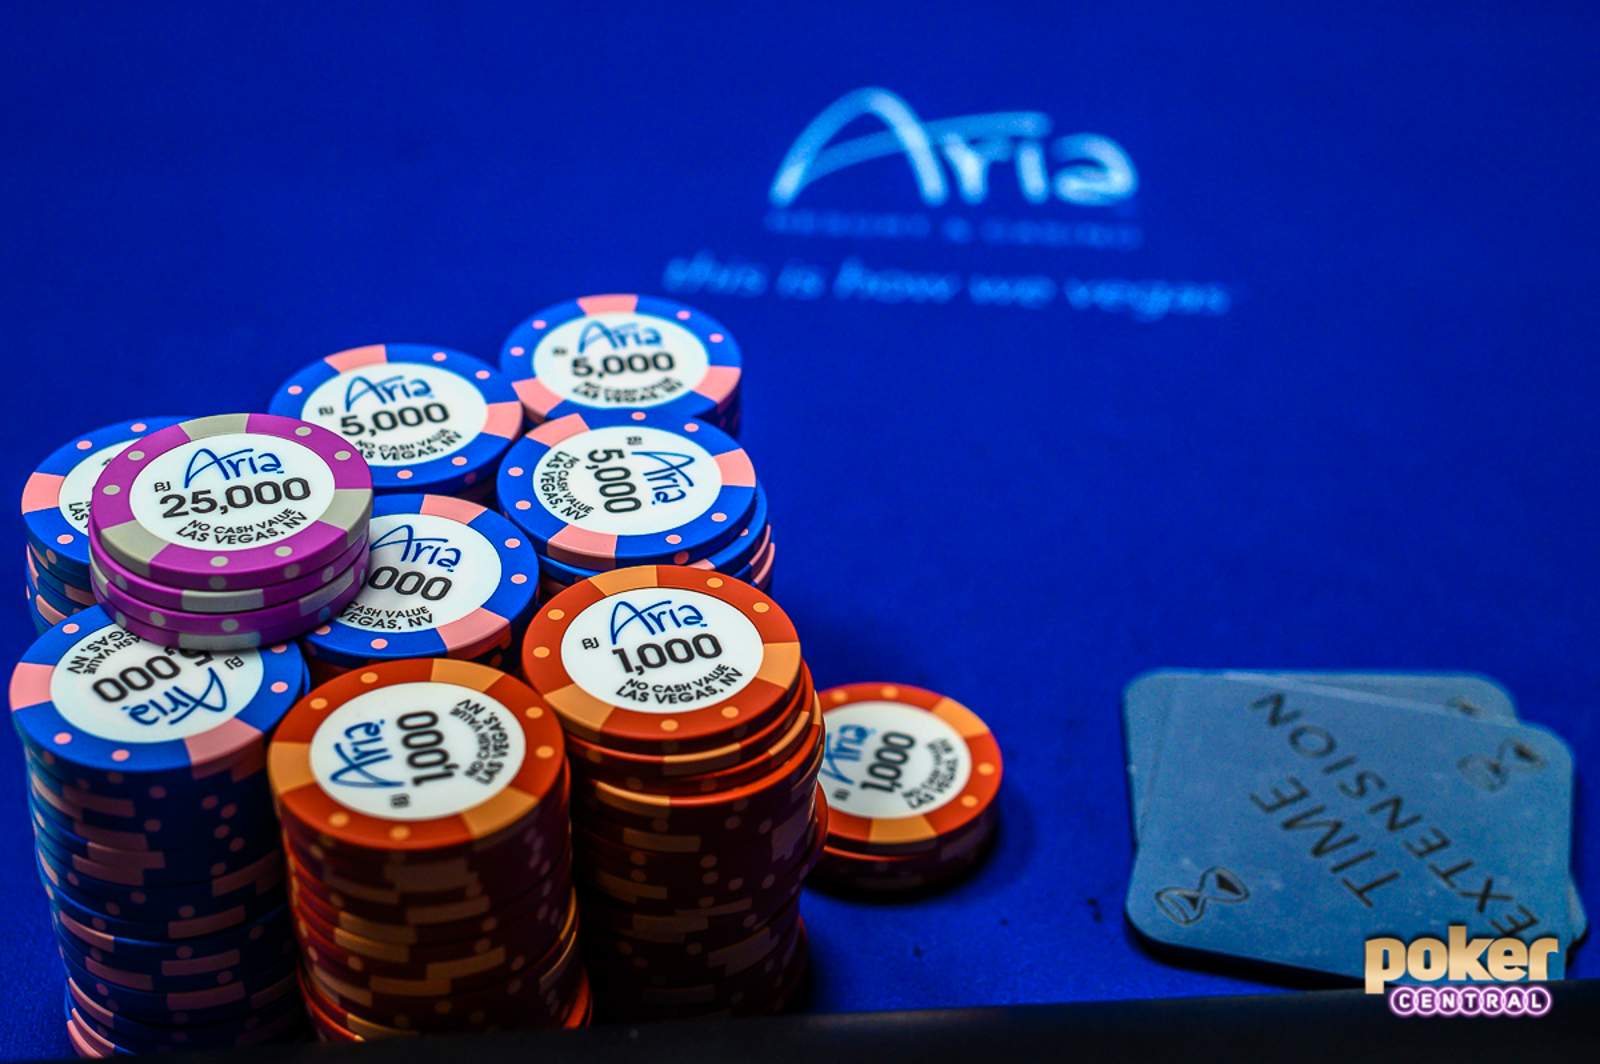 Poker Central Releases High Roller of the Year Summer Schedule